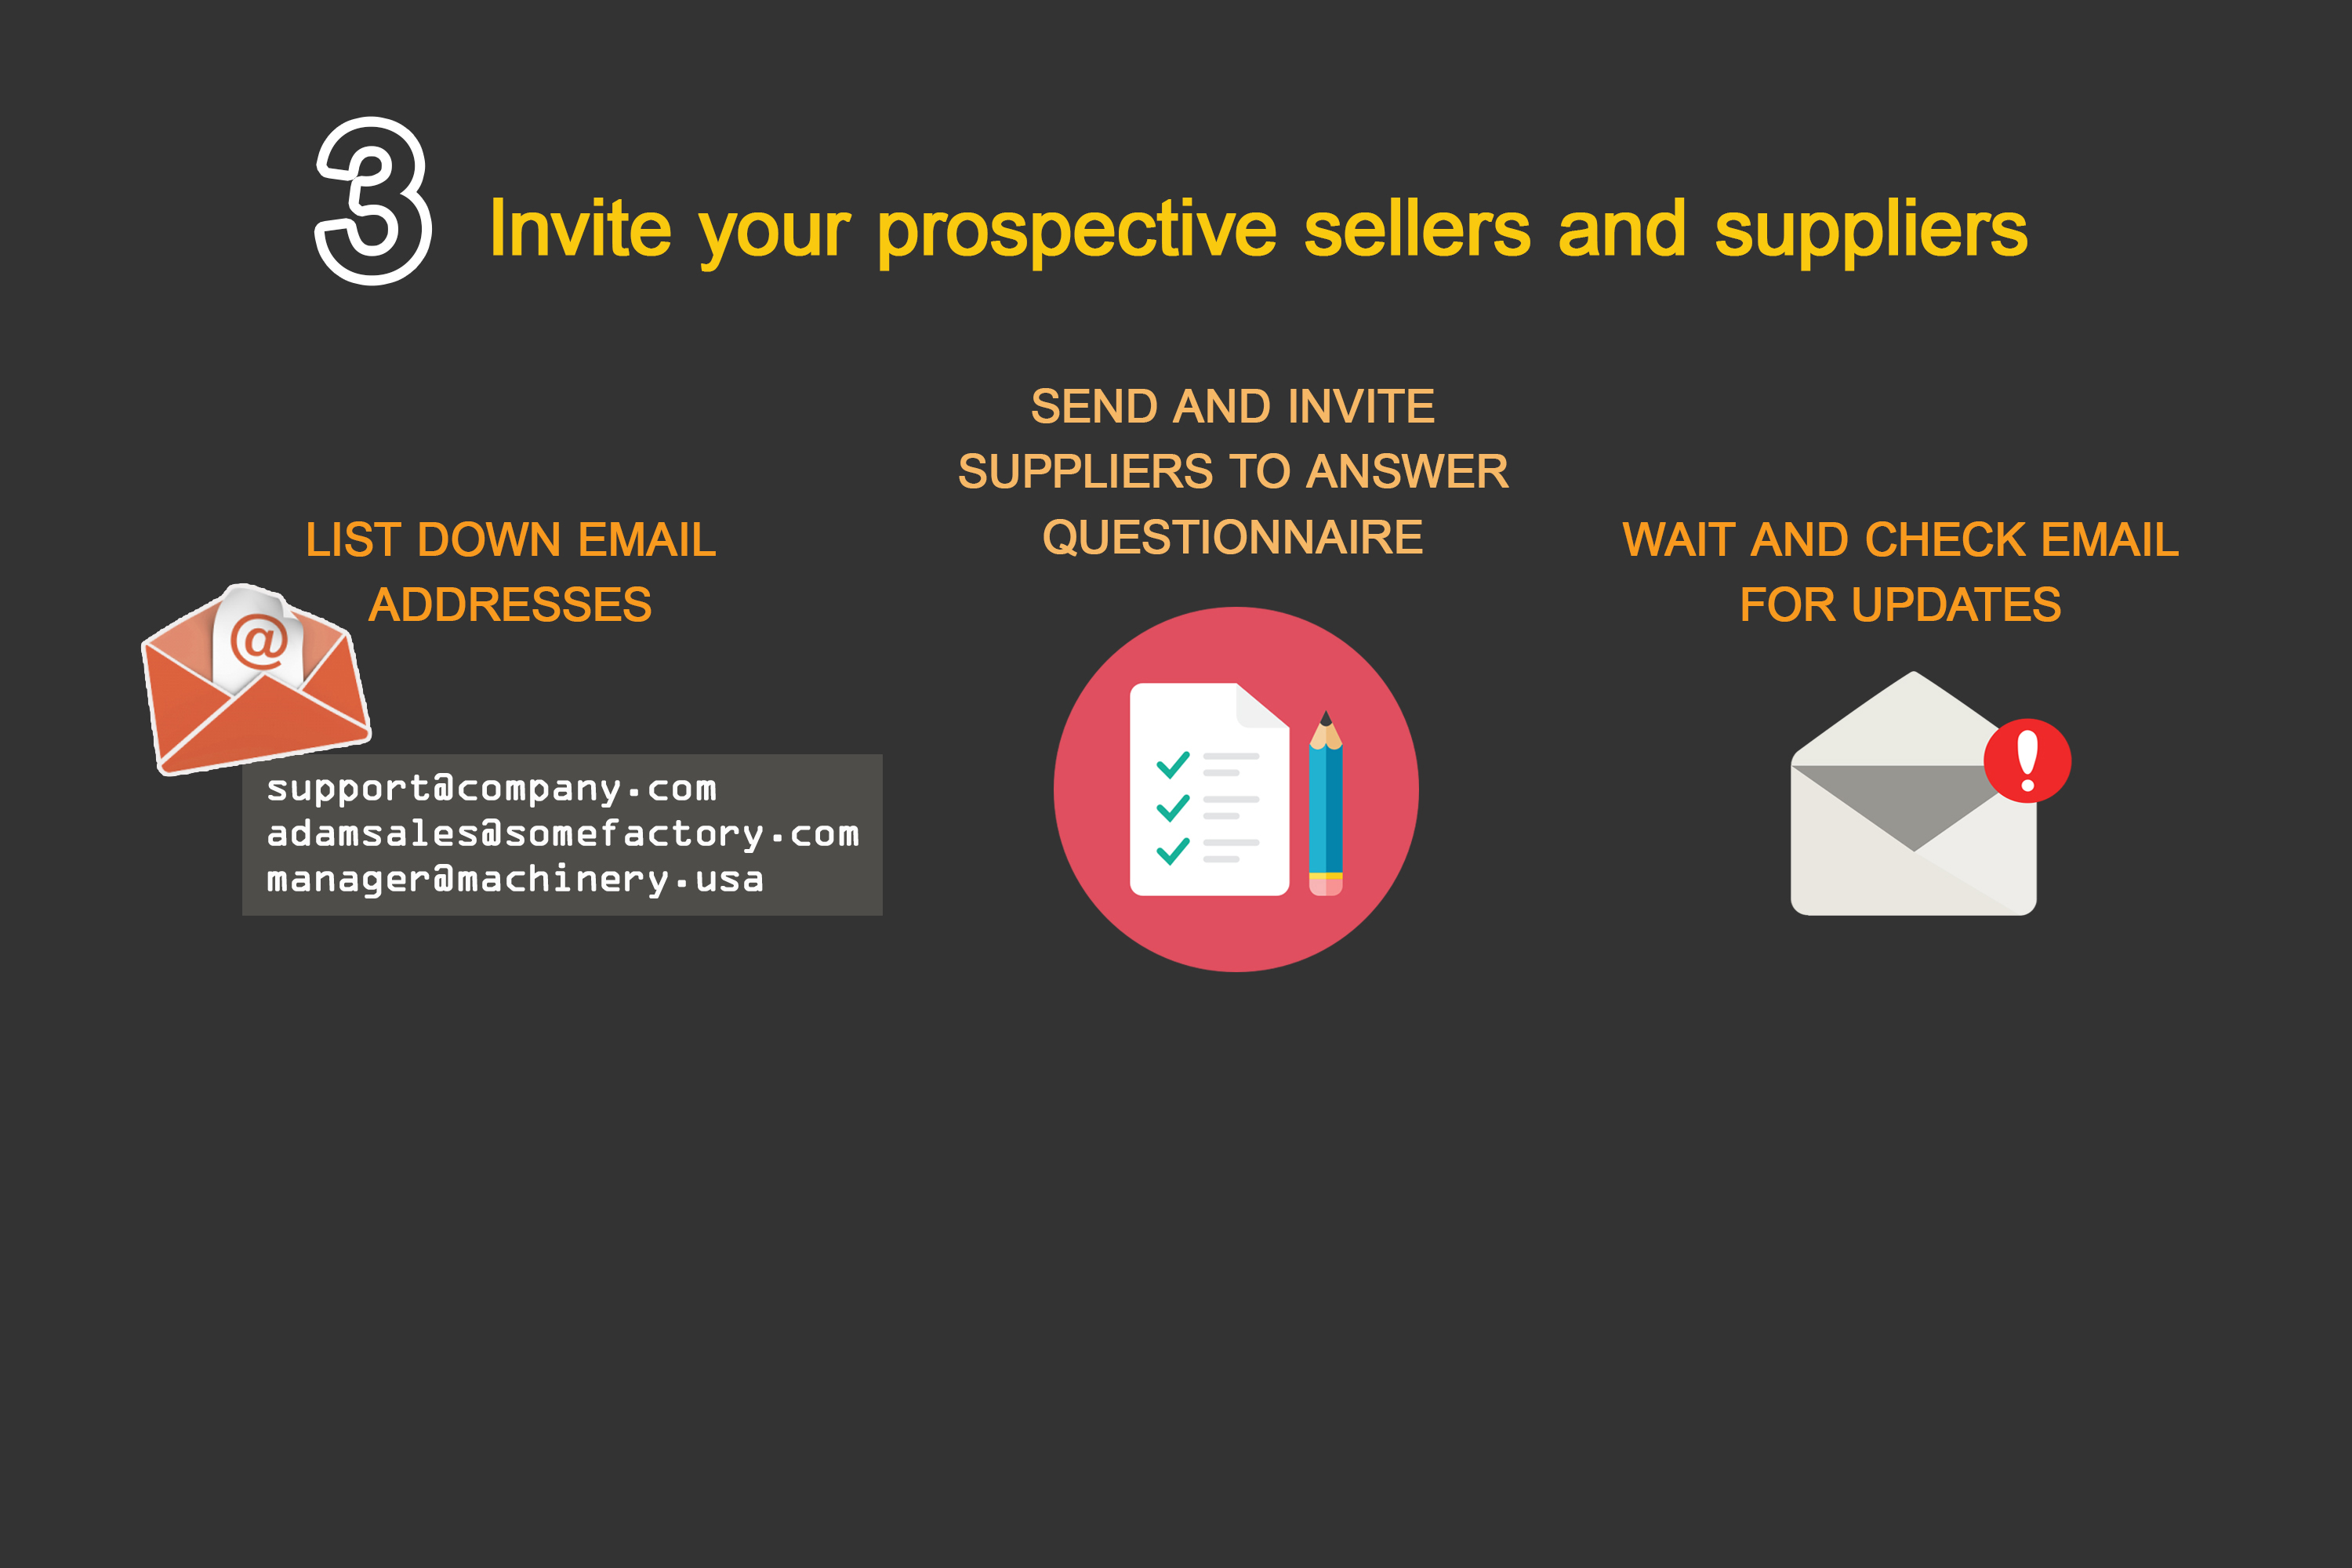 Gather your prospective suppliers' emails, invite them up, and have them answer the given questionnaire. You will receive an email notification whenever a seller answers or finishes a questionnaire.